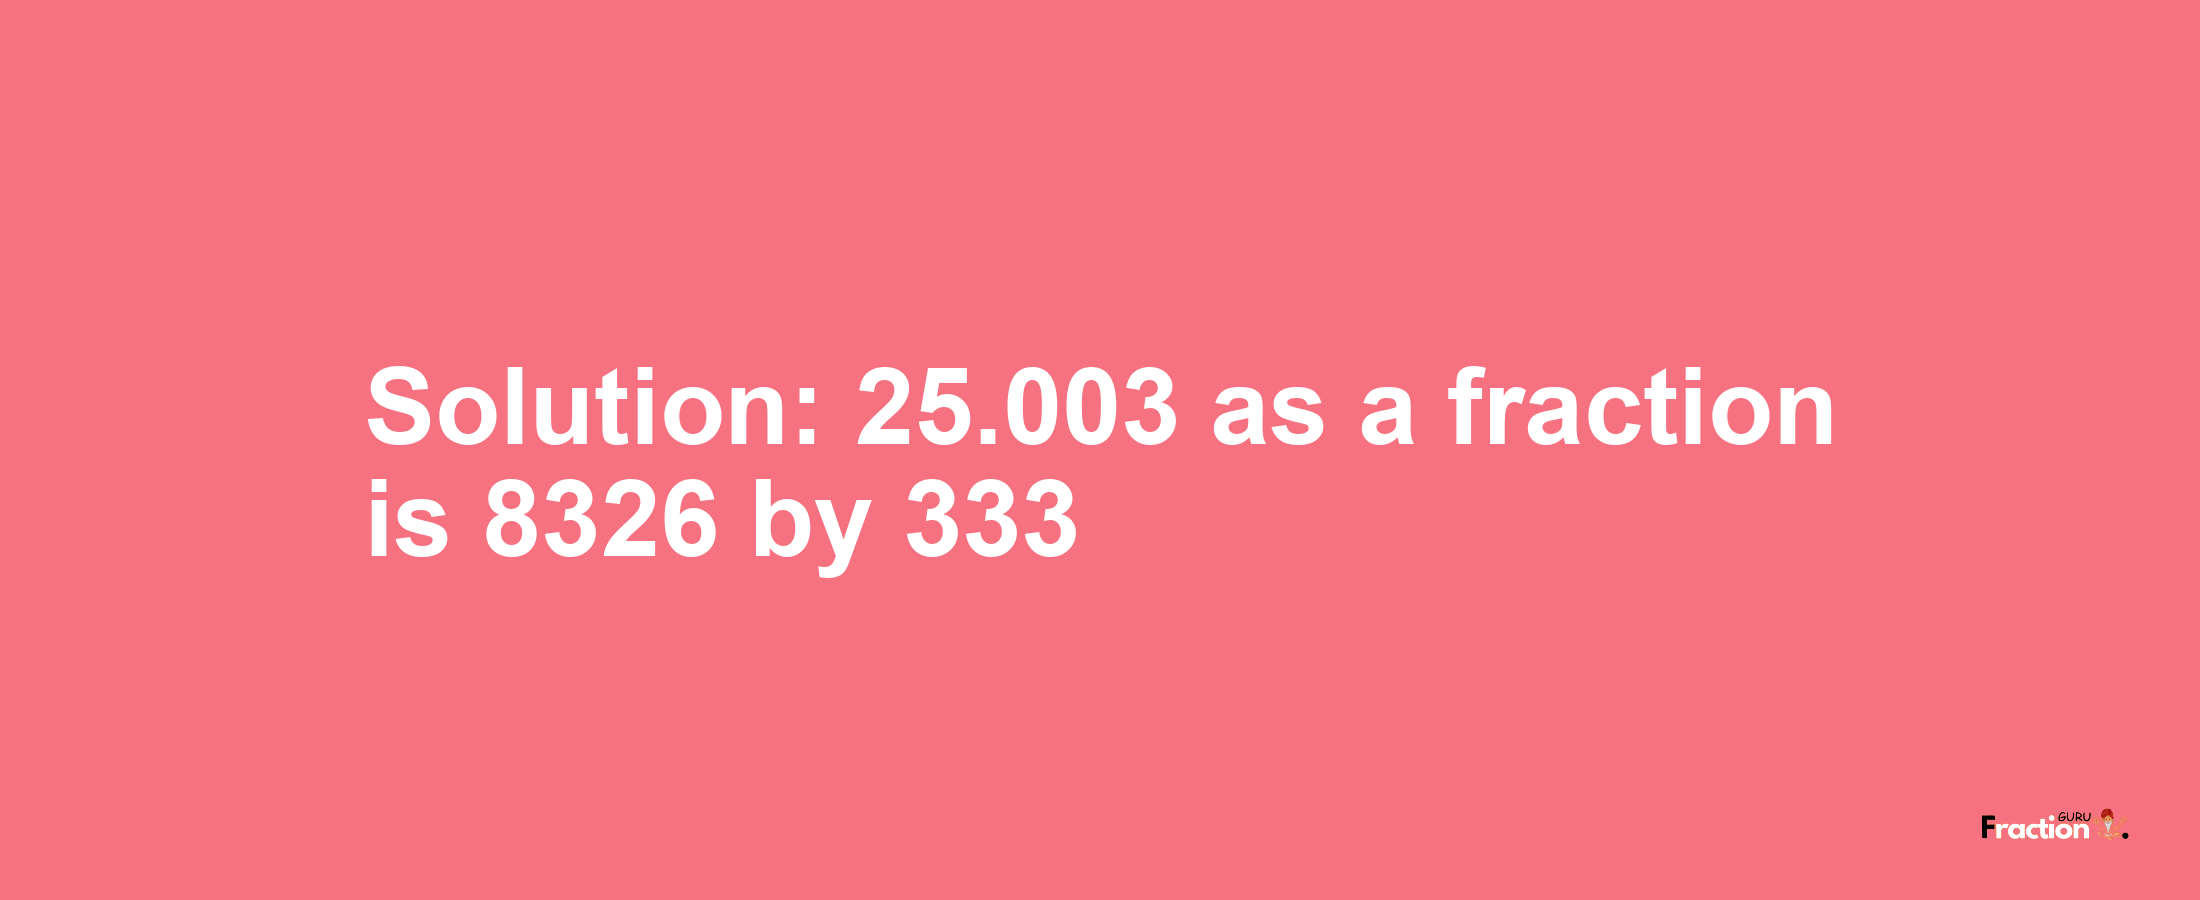 Solution:25.003 as a fraction is 8326/333